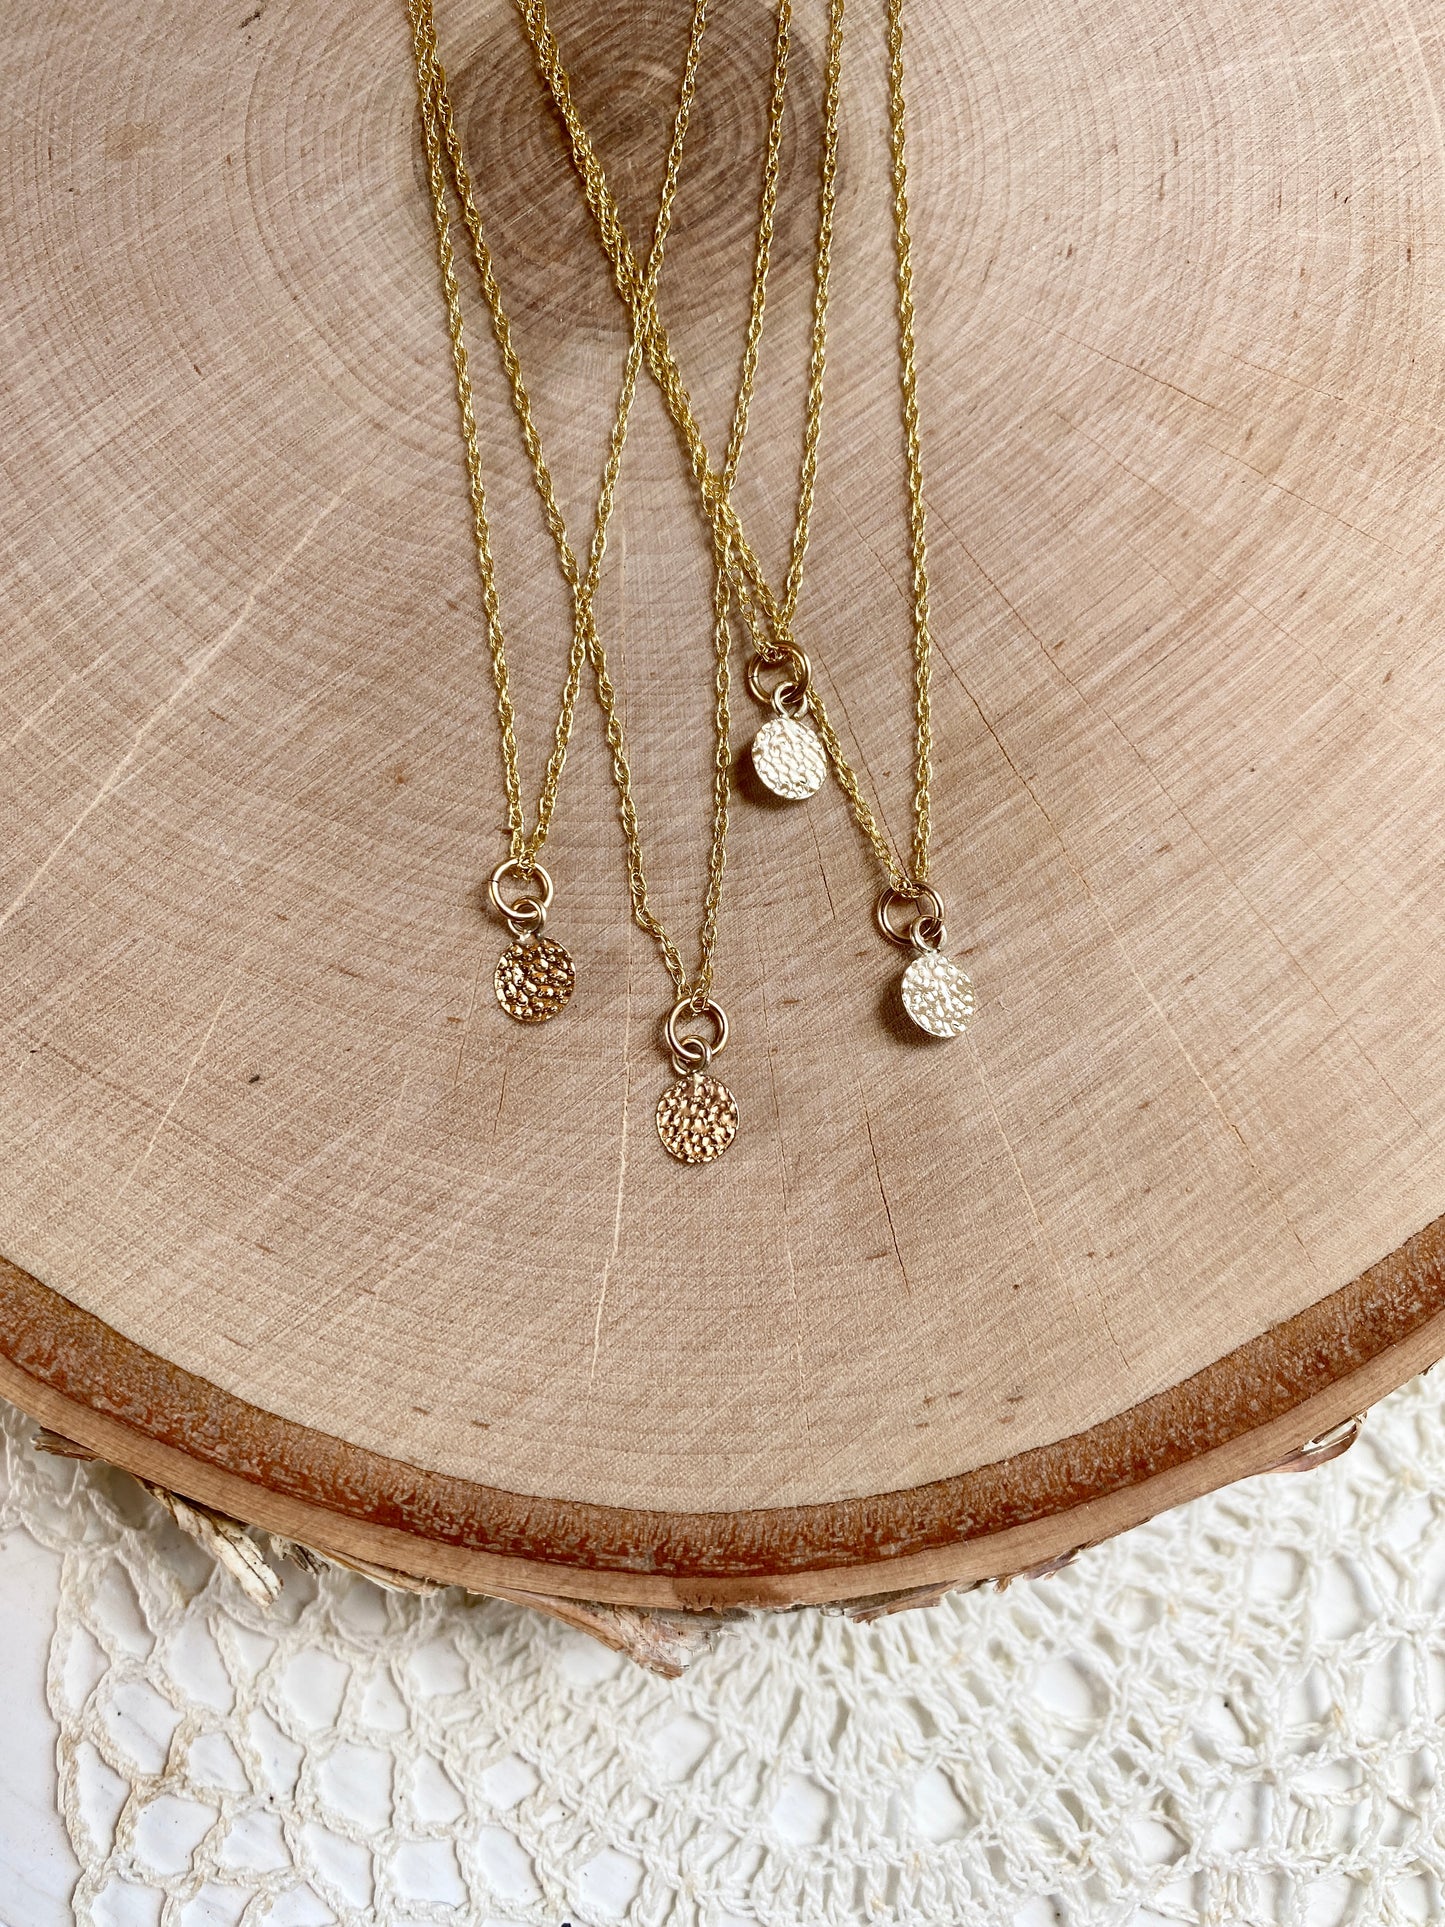 Into the Light ~ 14K Yellow Gold Fill Hammered Charm Necklace - Sacred Symbols Series